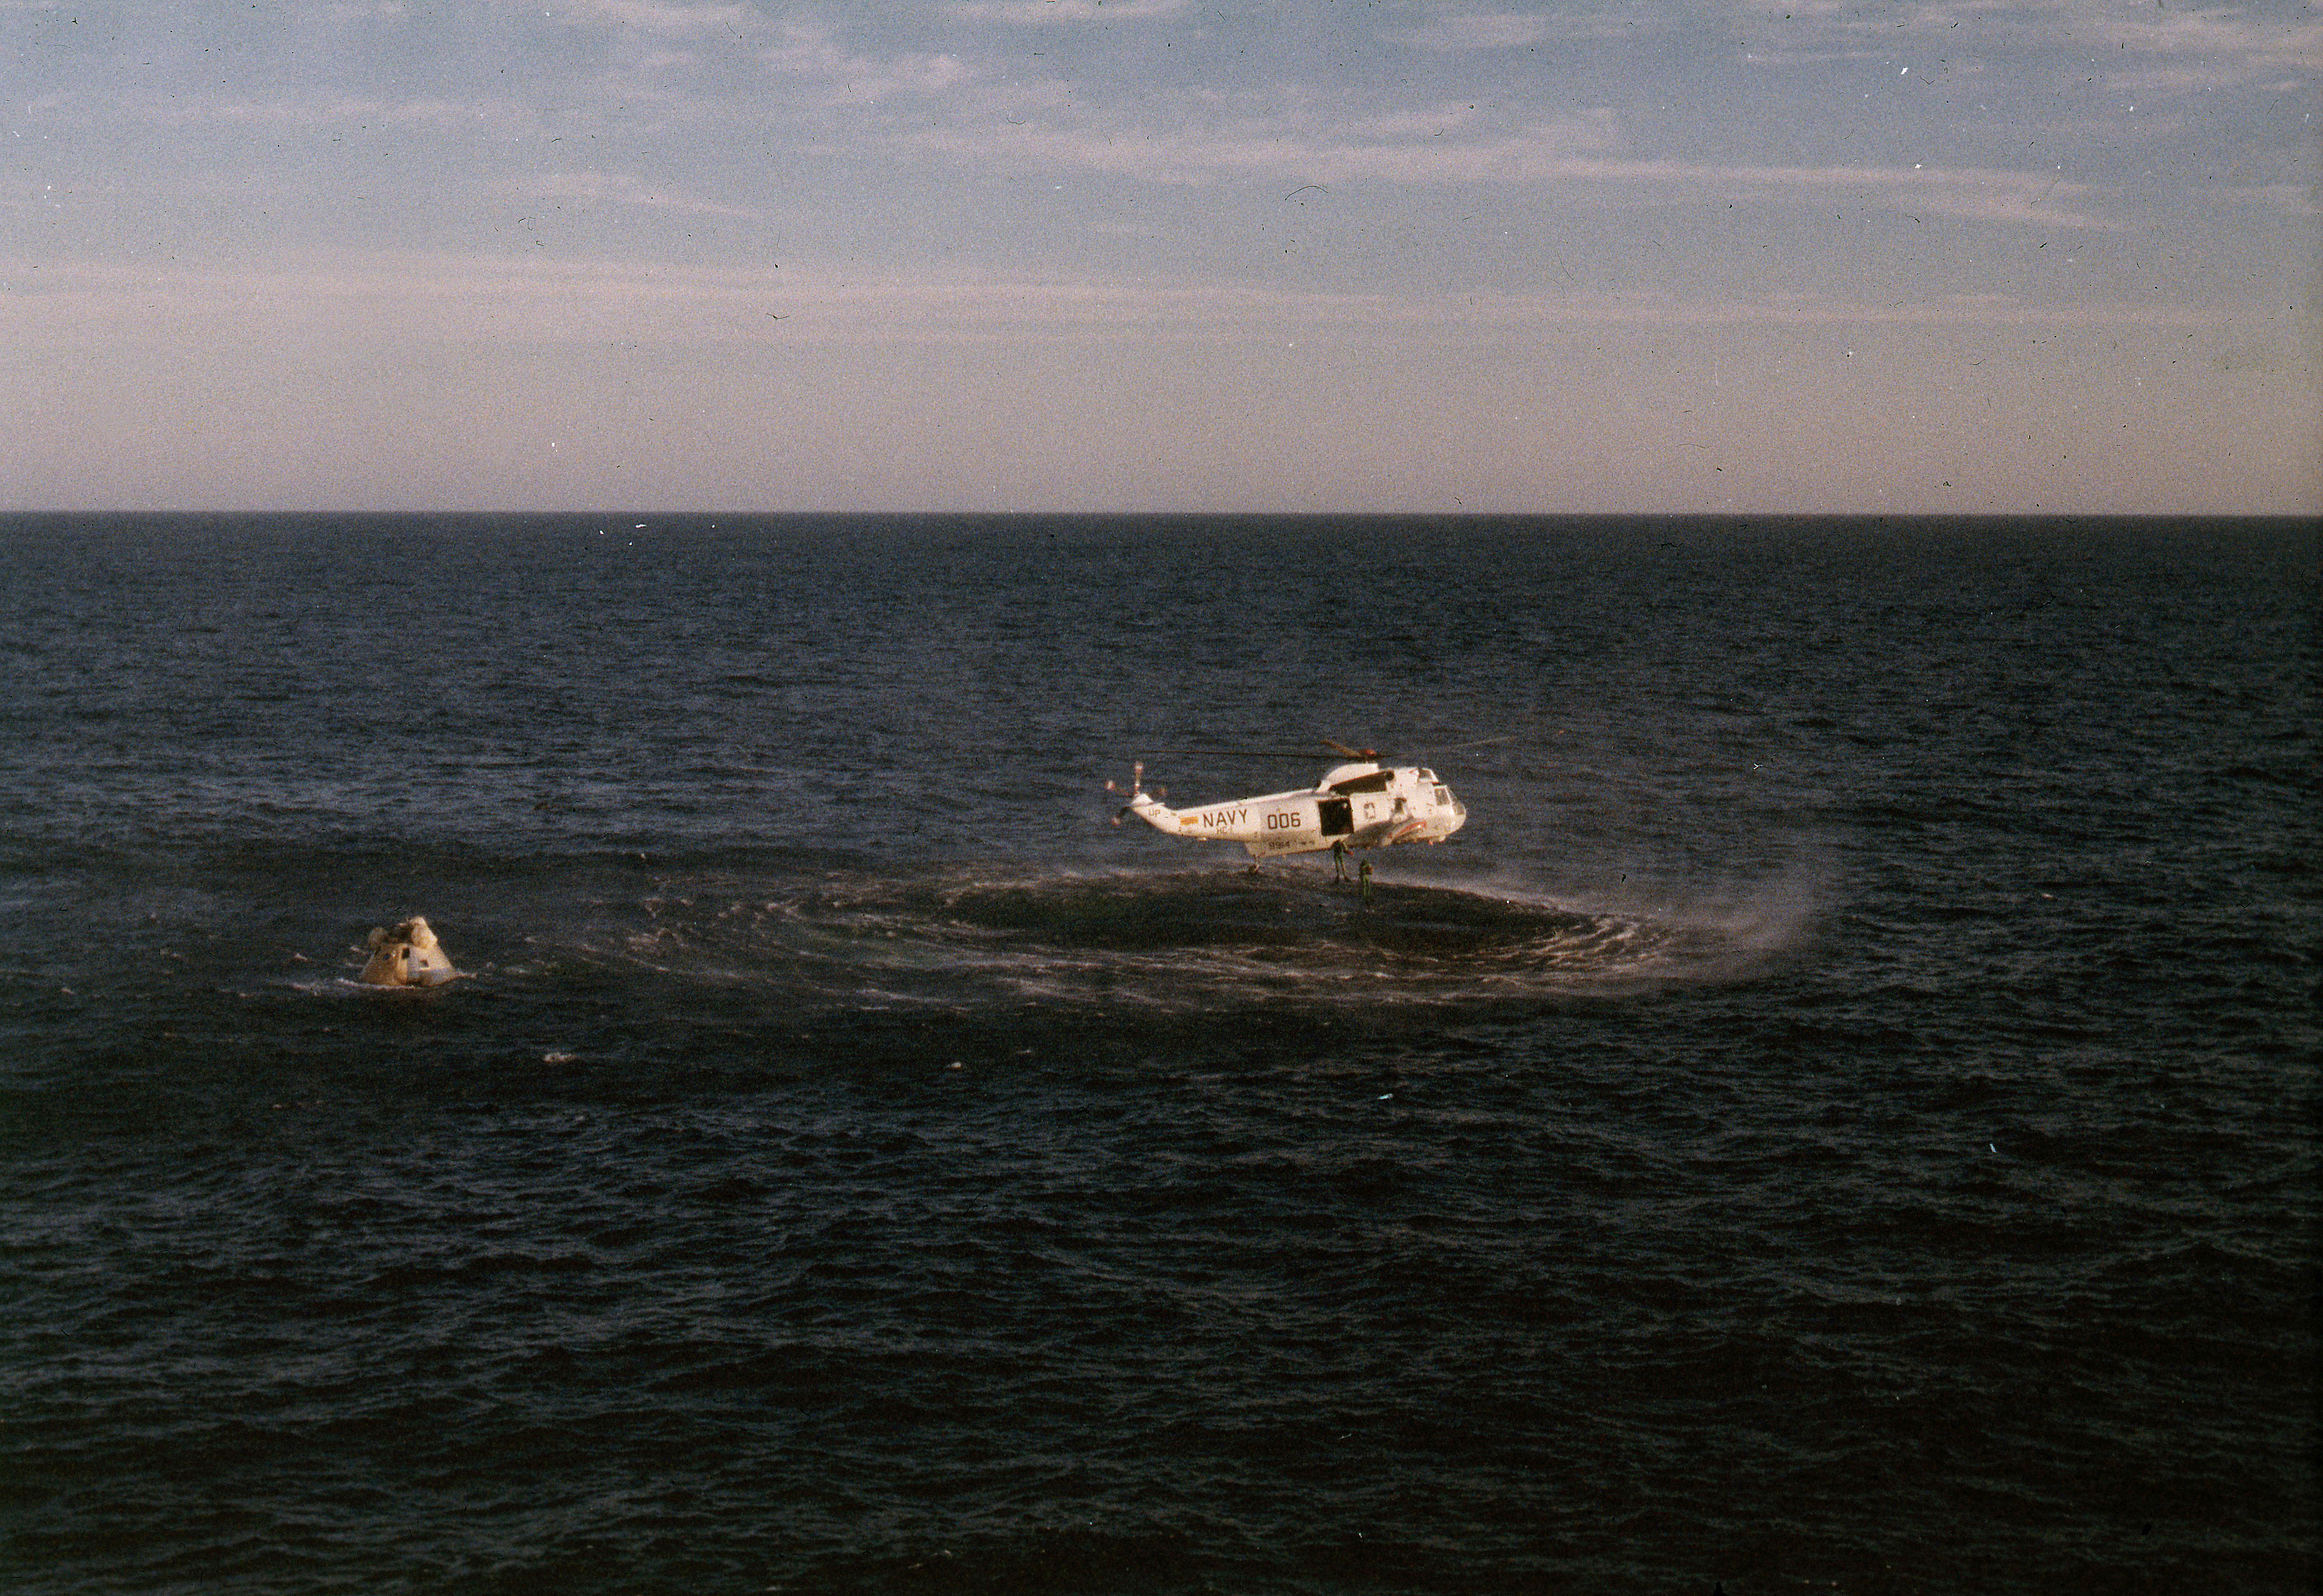 Recovery helicopter from the U.S.S. New Orleans about to drop swimmers into the water